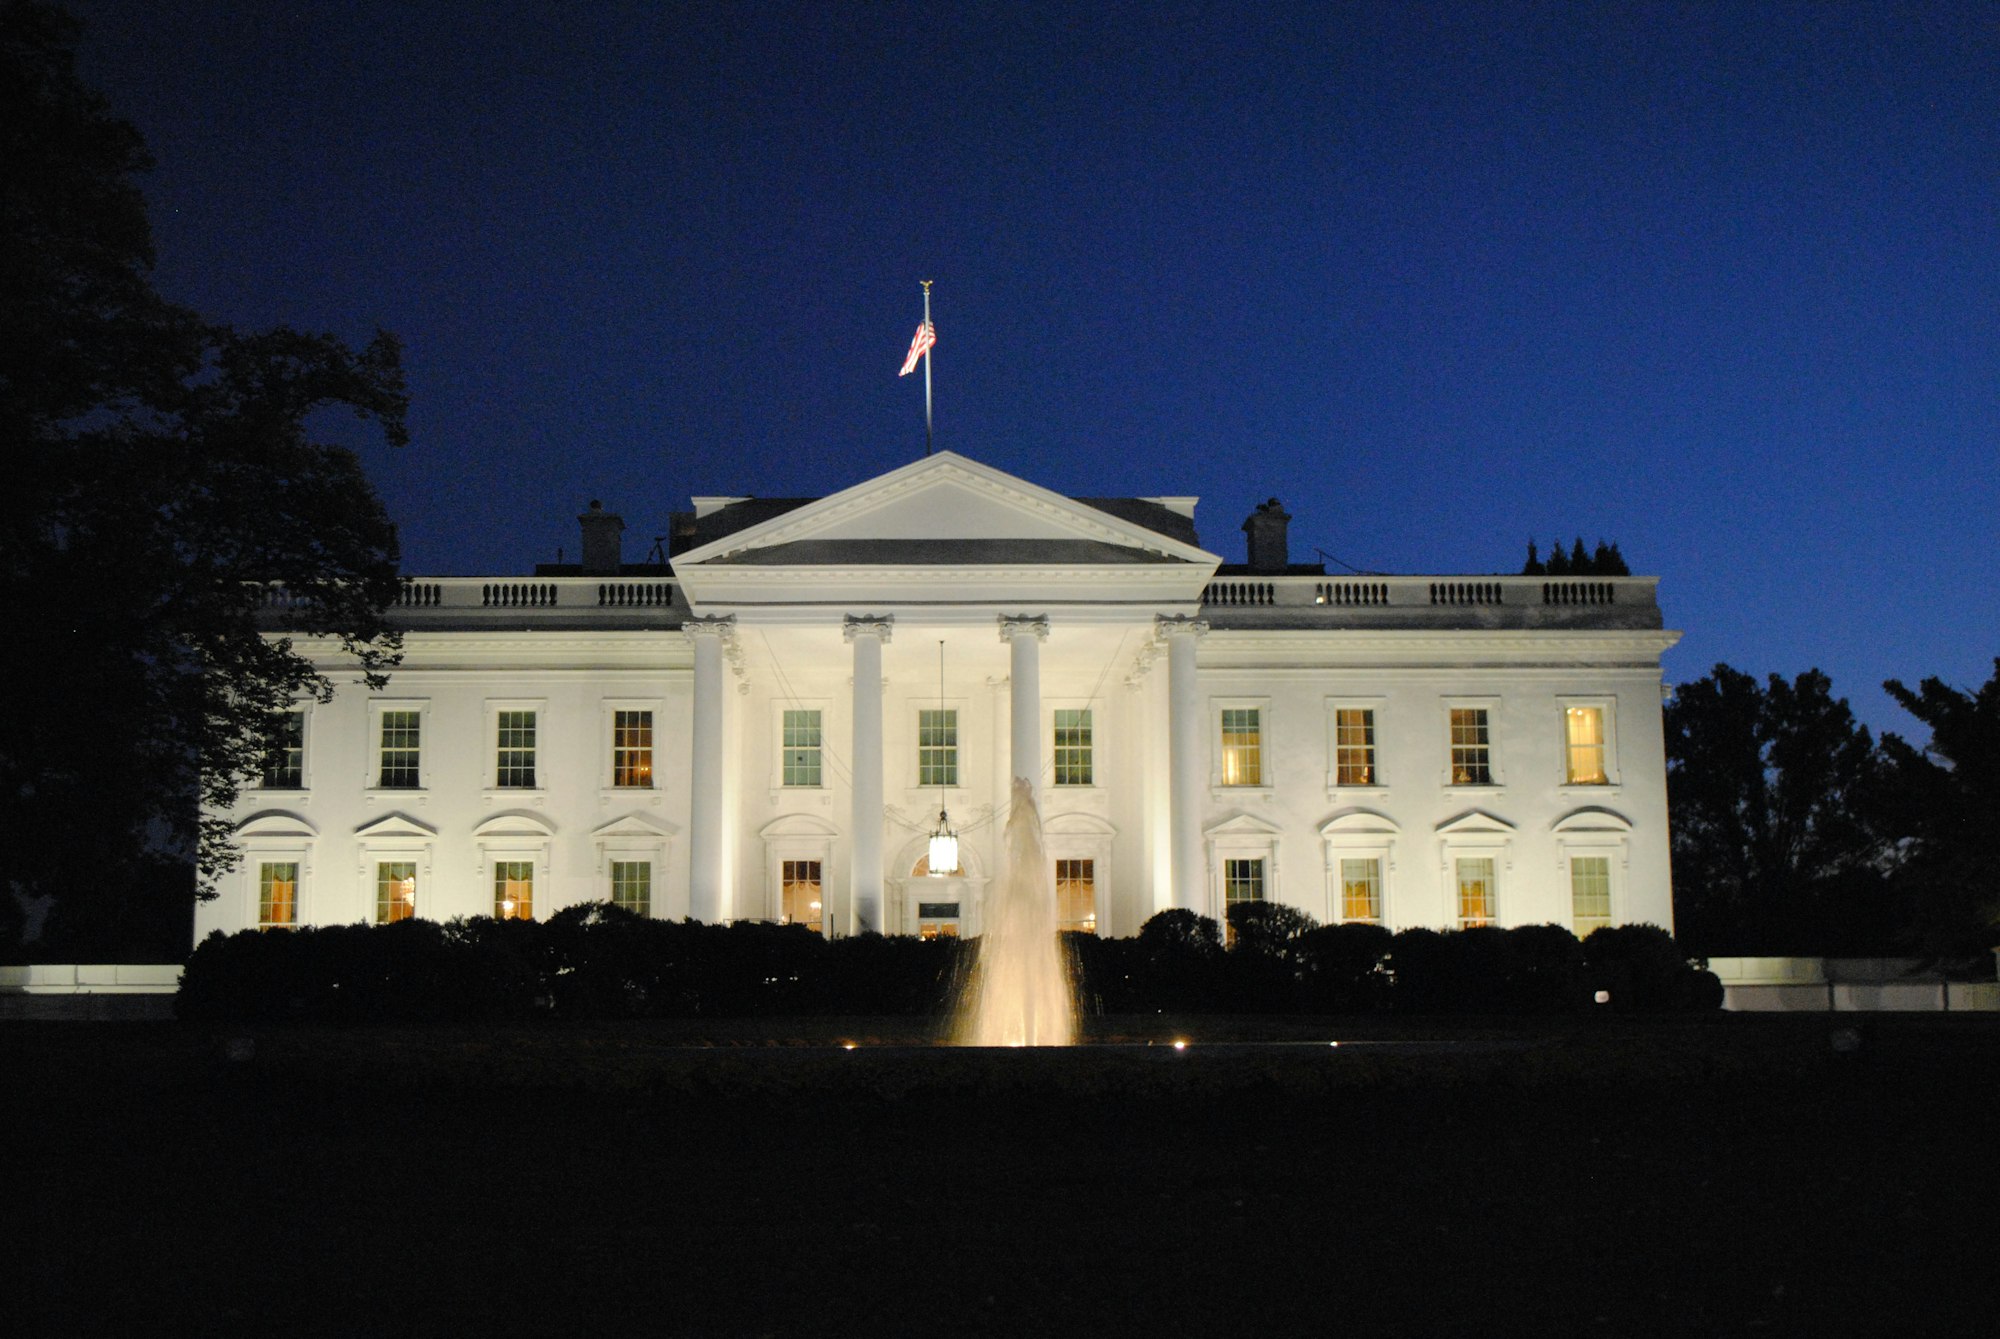 Who Was The First President To Live In The White House?